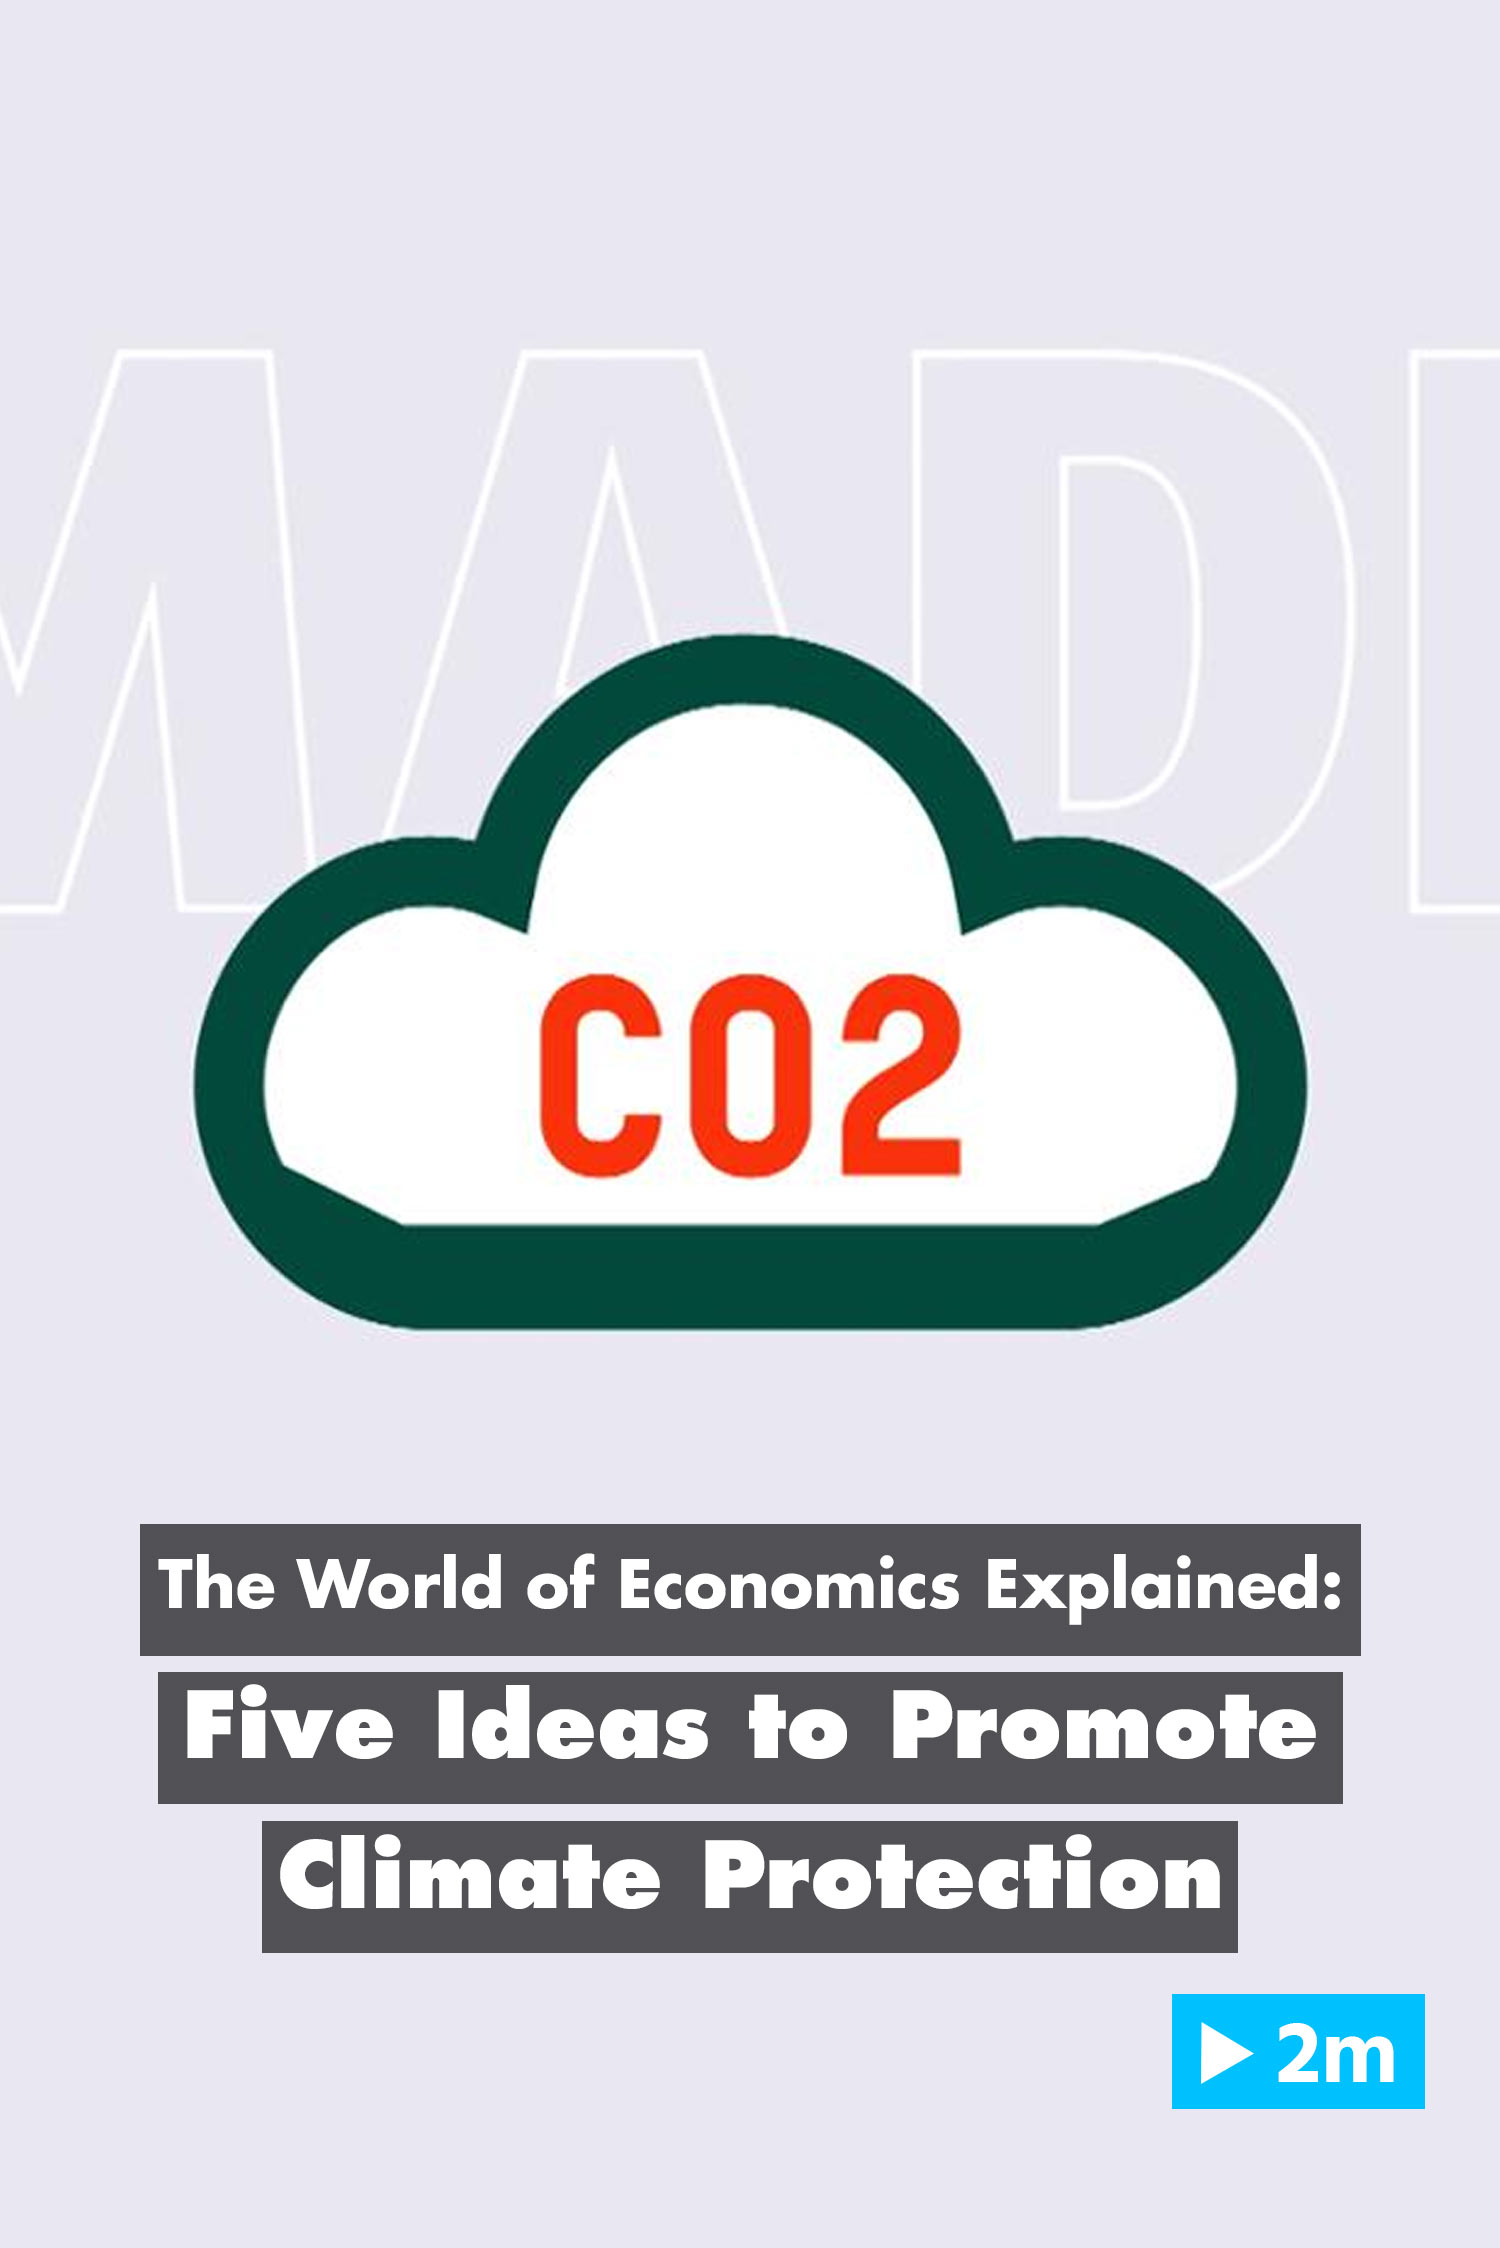 The World of Economics Explained: Five Ideas to Promote Climate Protection